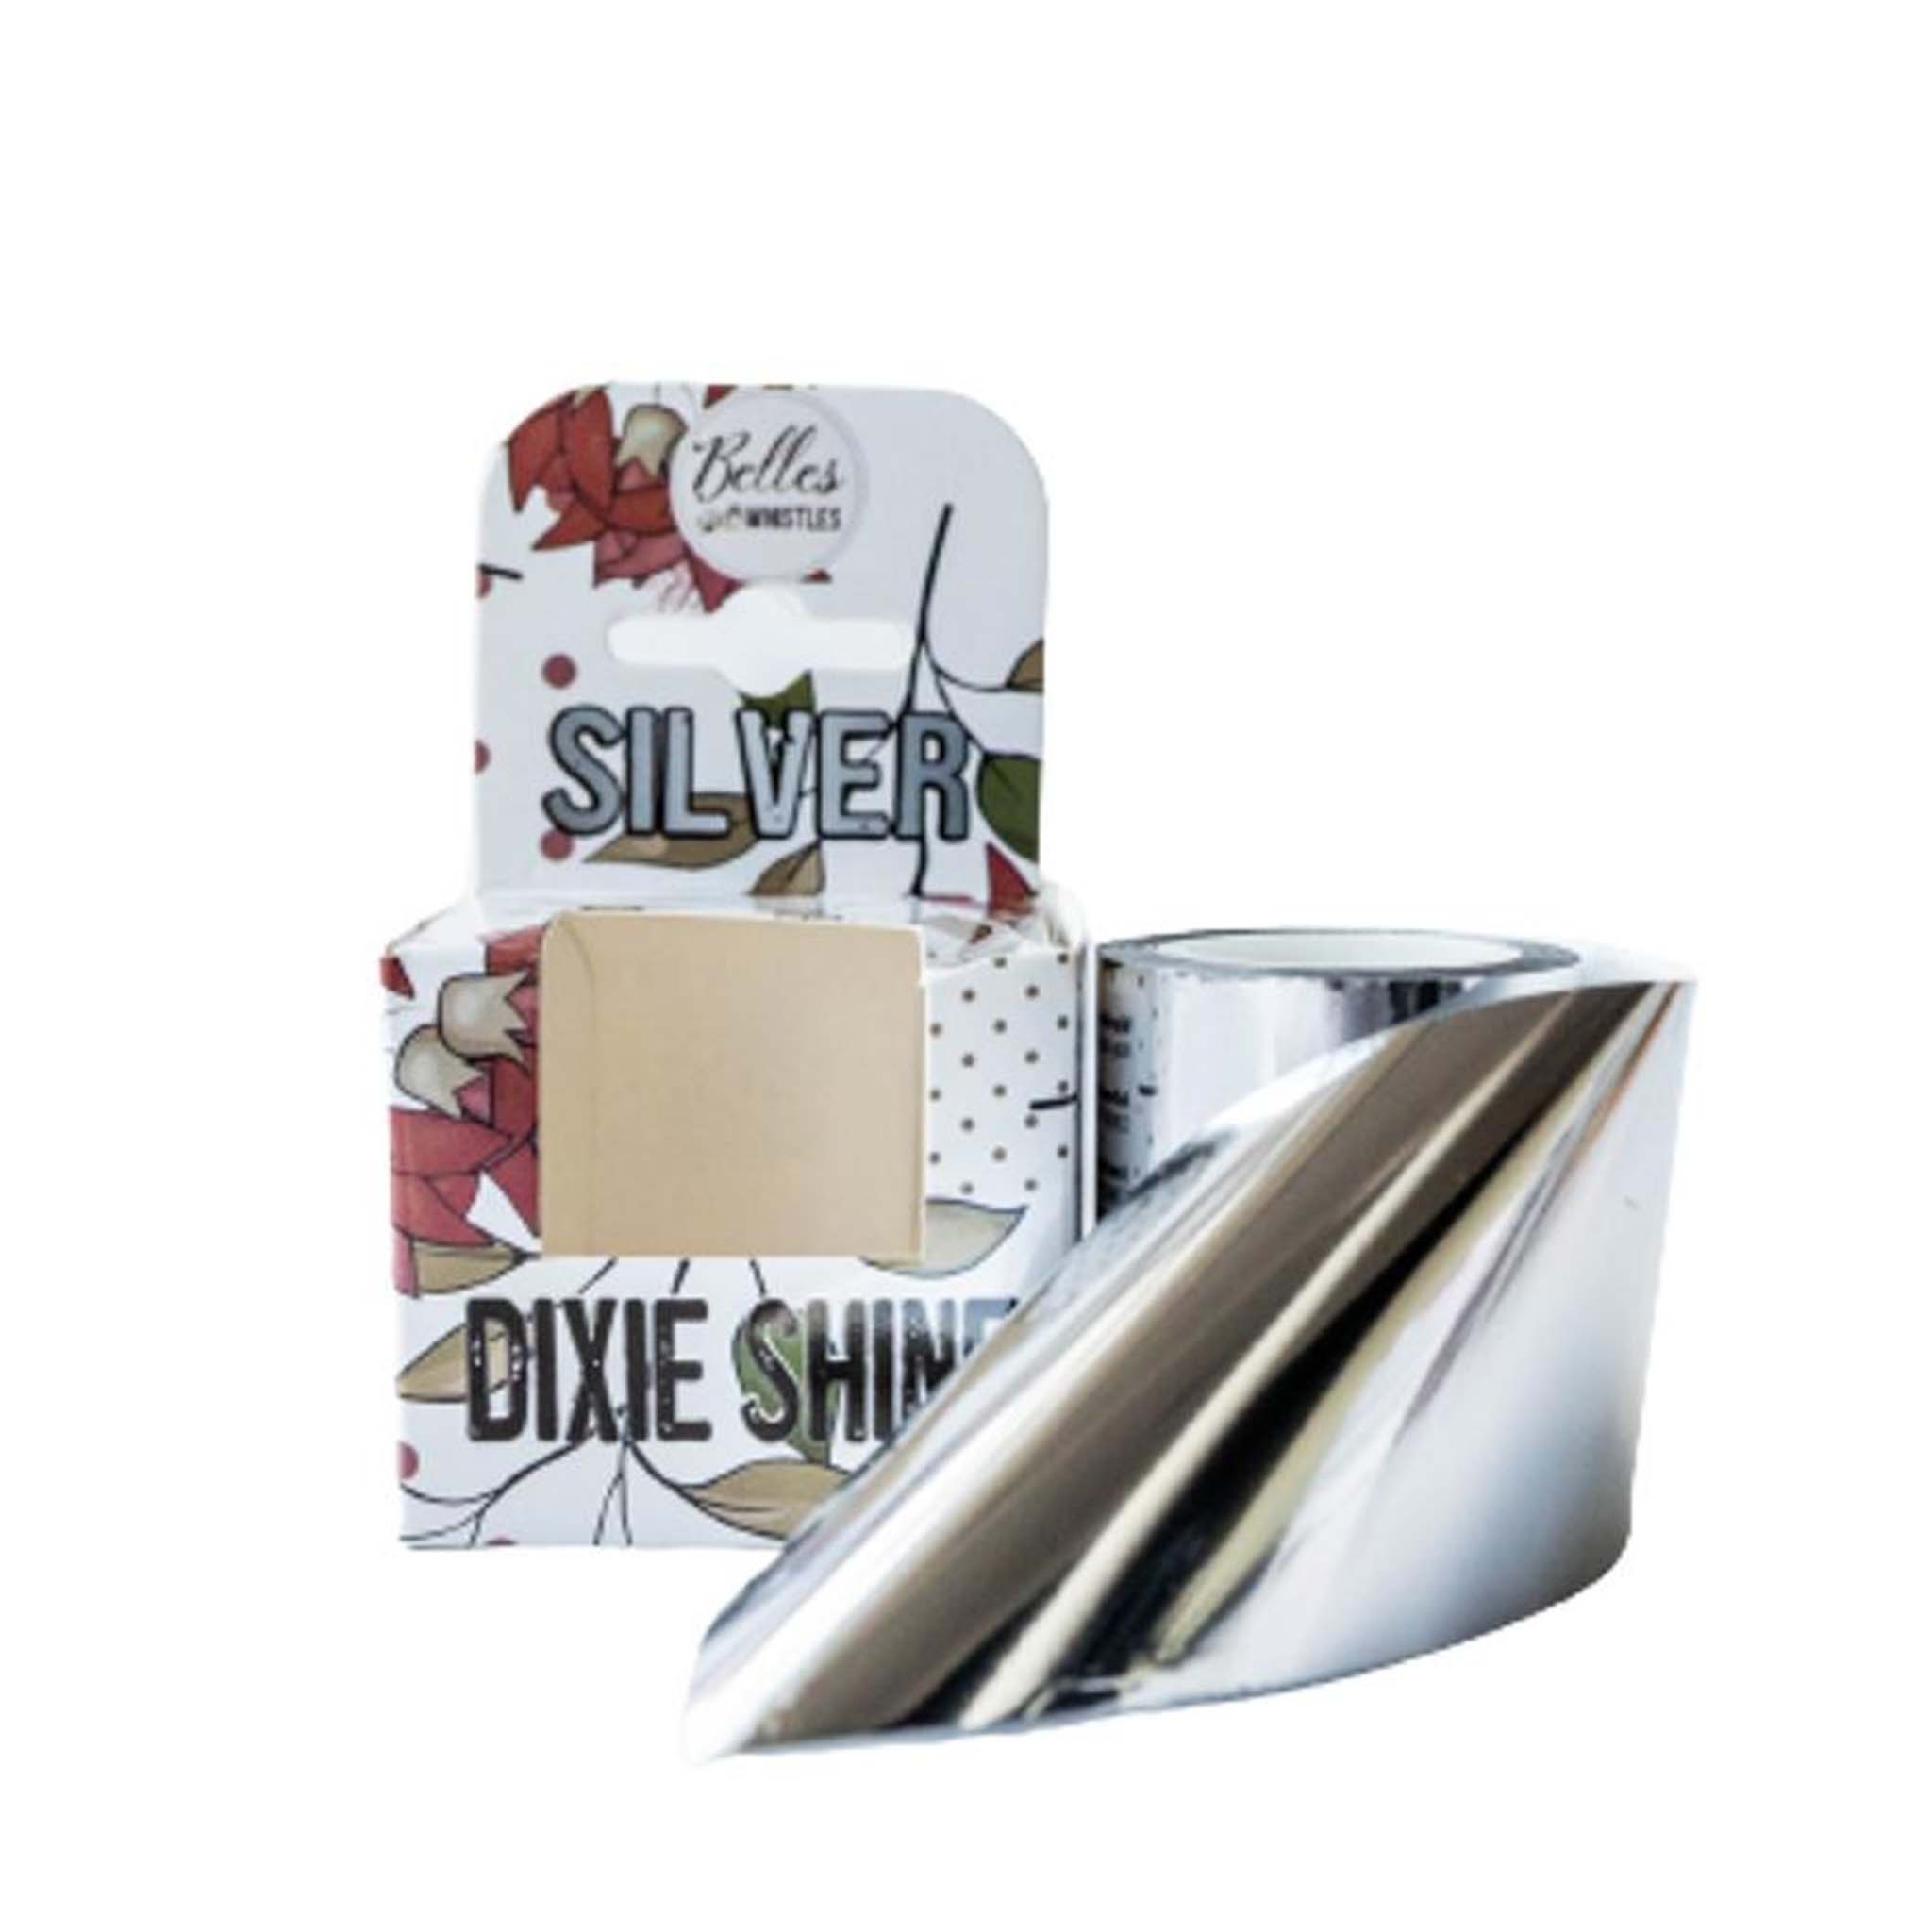 A package of Belles & Whistles Dixie Shine Silver is on a white background. The foil roll is displayed next to the package.